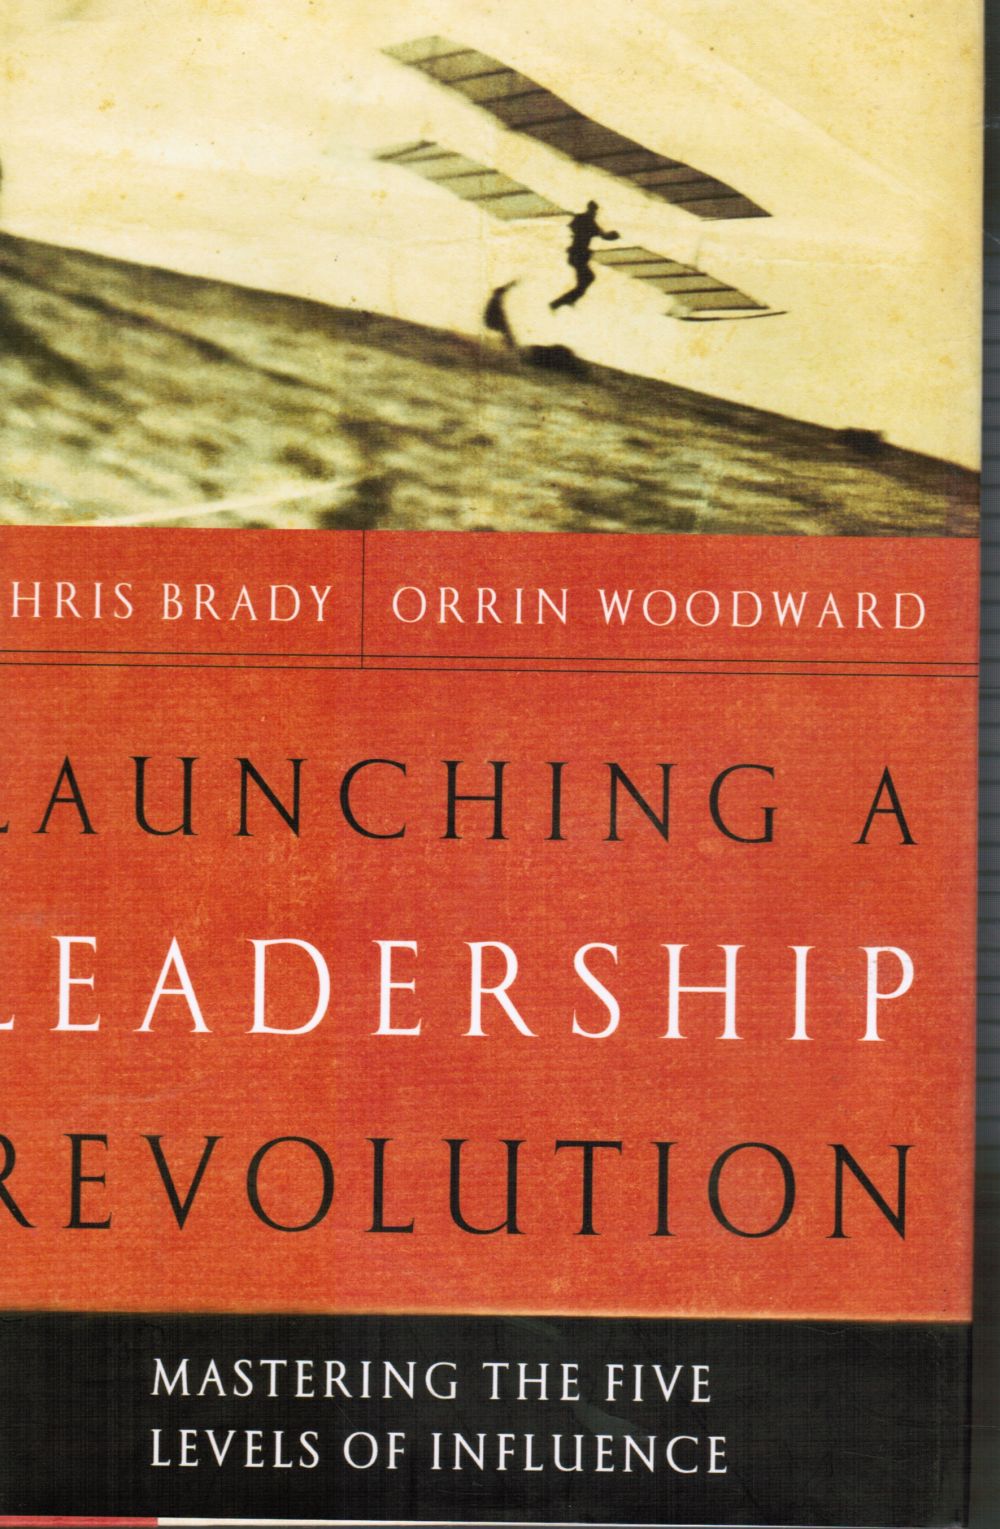 BRADY, CHRIS; ORRIN WOODWARD - Launching a Leadership Revolution: Mastering the Five Levels of Influence